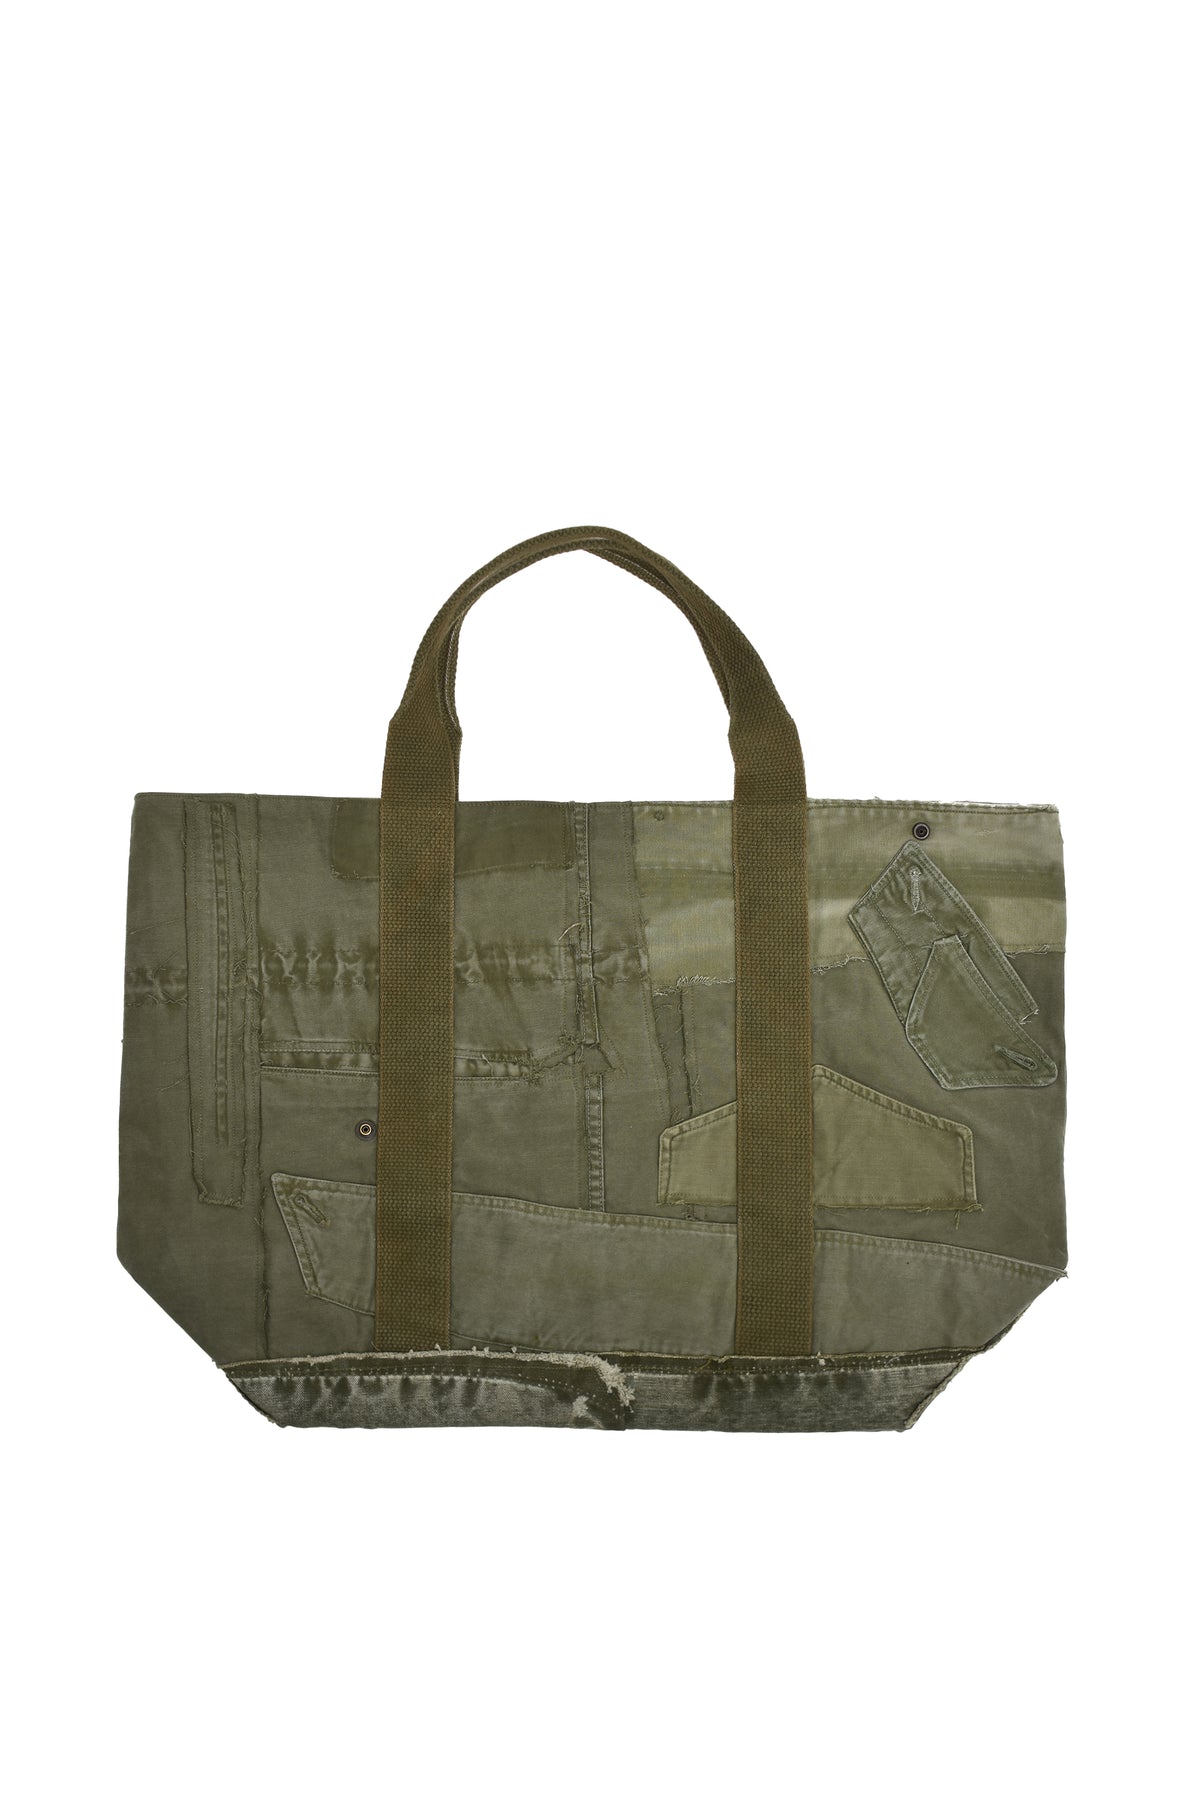 MIXED ARMY TOTE / ARMY